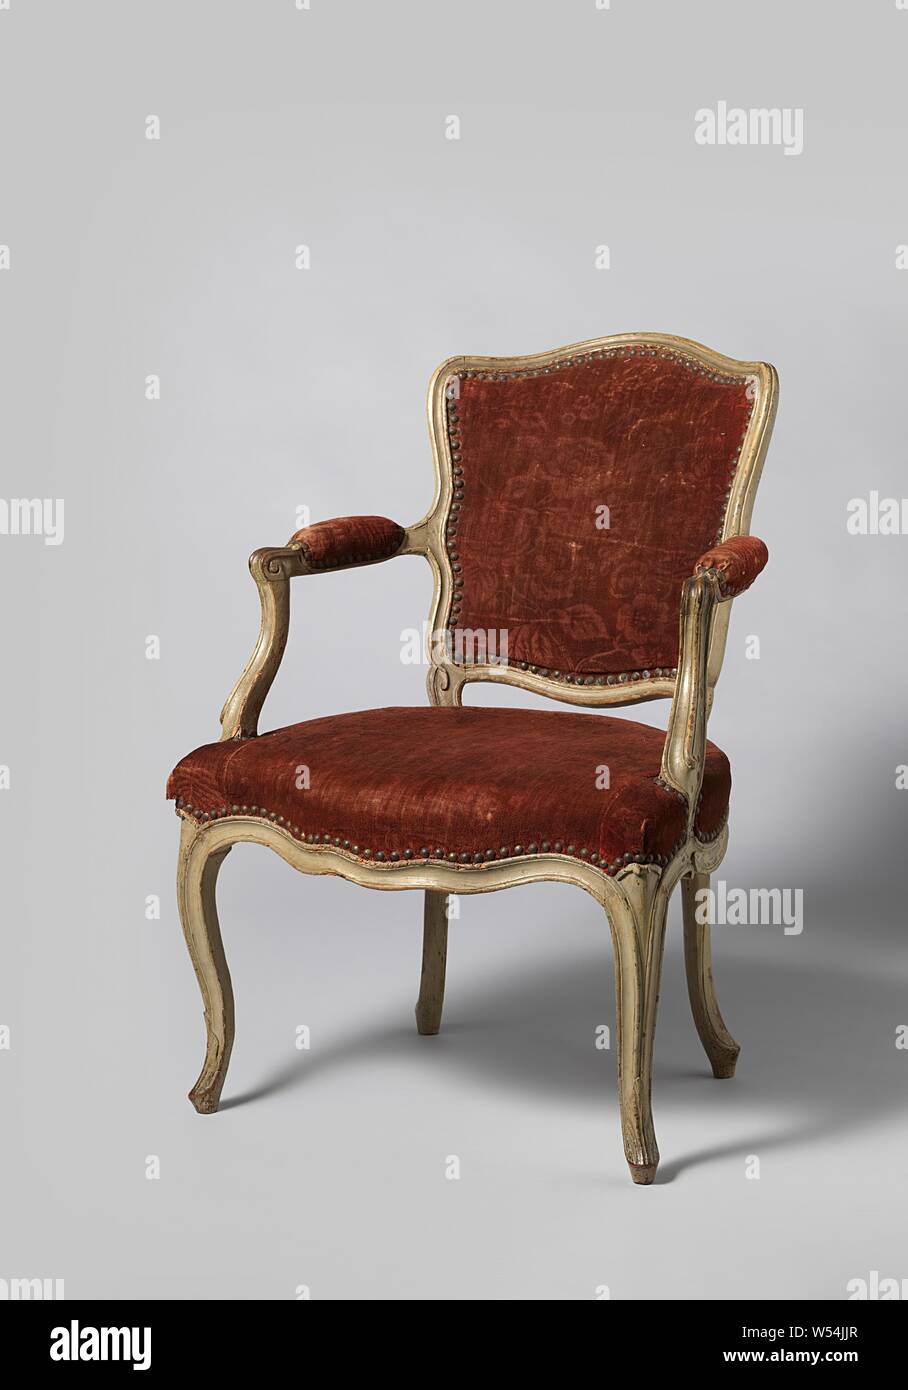 Armchair on S-shaped curved front legs, painted gray walnut and covered with red velvet with rose branch pattern, Armchair made of gray painted walnut with red nailed velvet with a rose branch pattern. The S-shaped front legs, placed at an angle, merge into the scaled seat lines without interruption. The trapezoidal seat is slightly curved at the front and curved at the sides. The armrests recede outwards, have pads and end in volutes. The armrest struts merge into the armrests in an S-shape. The back window rests on small struts, slightly curved styles and sills., anonymous, France, 1750 Stock Photo